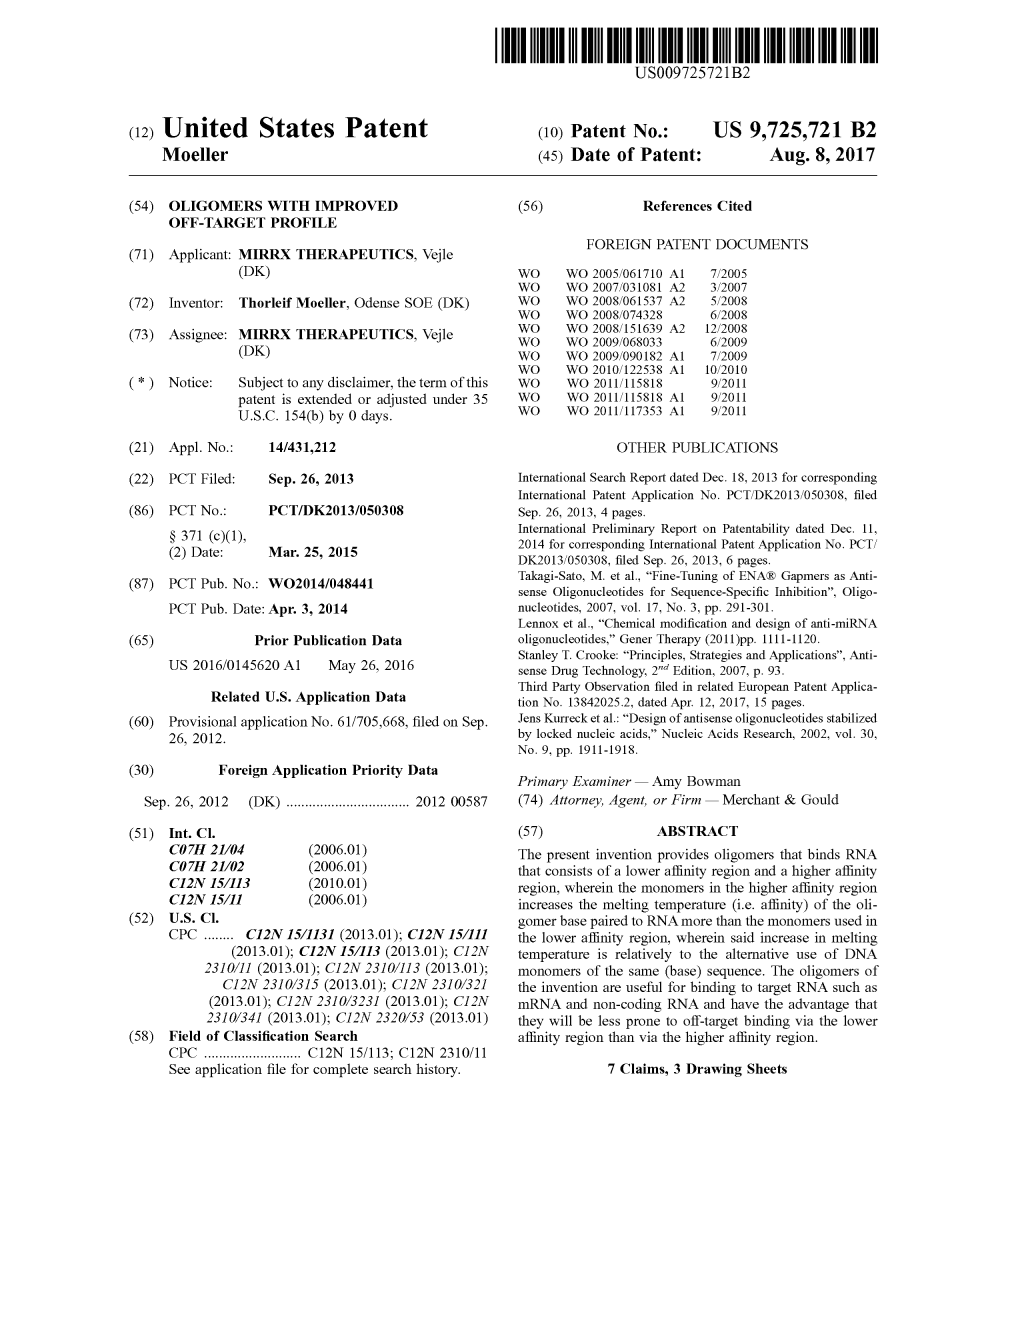 (12) United States Patent (10) Patent No.: US 9,725,721 B2 Moeller (45) Date of Patent: Aug